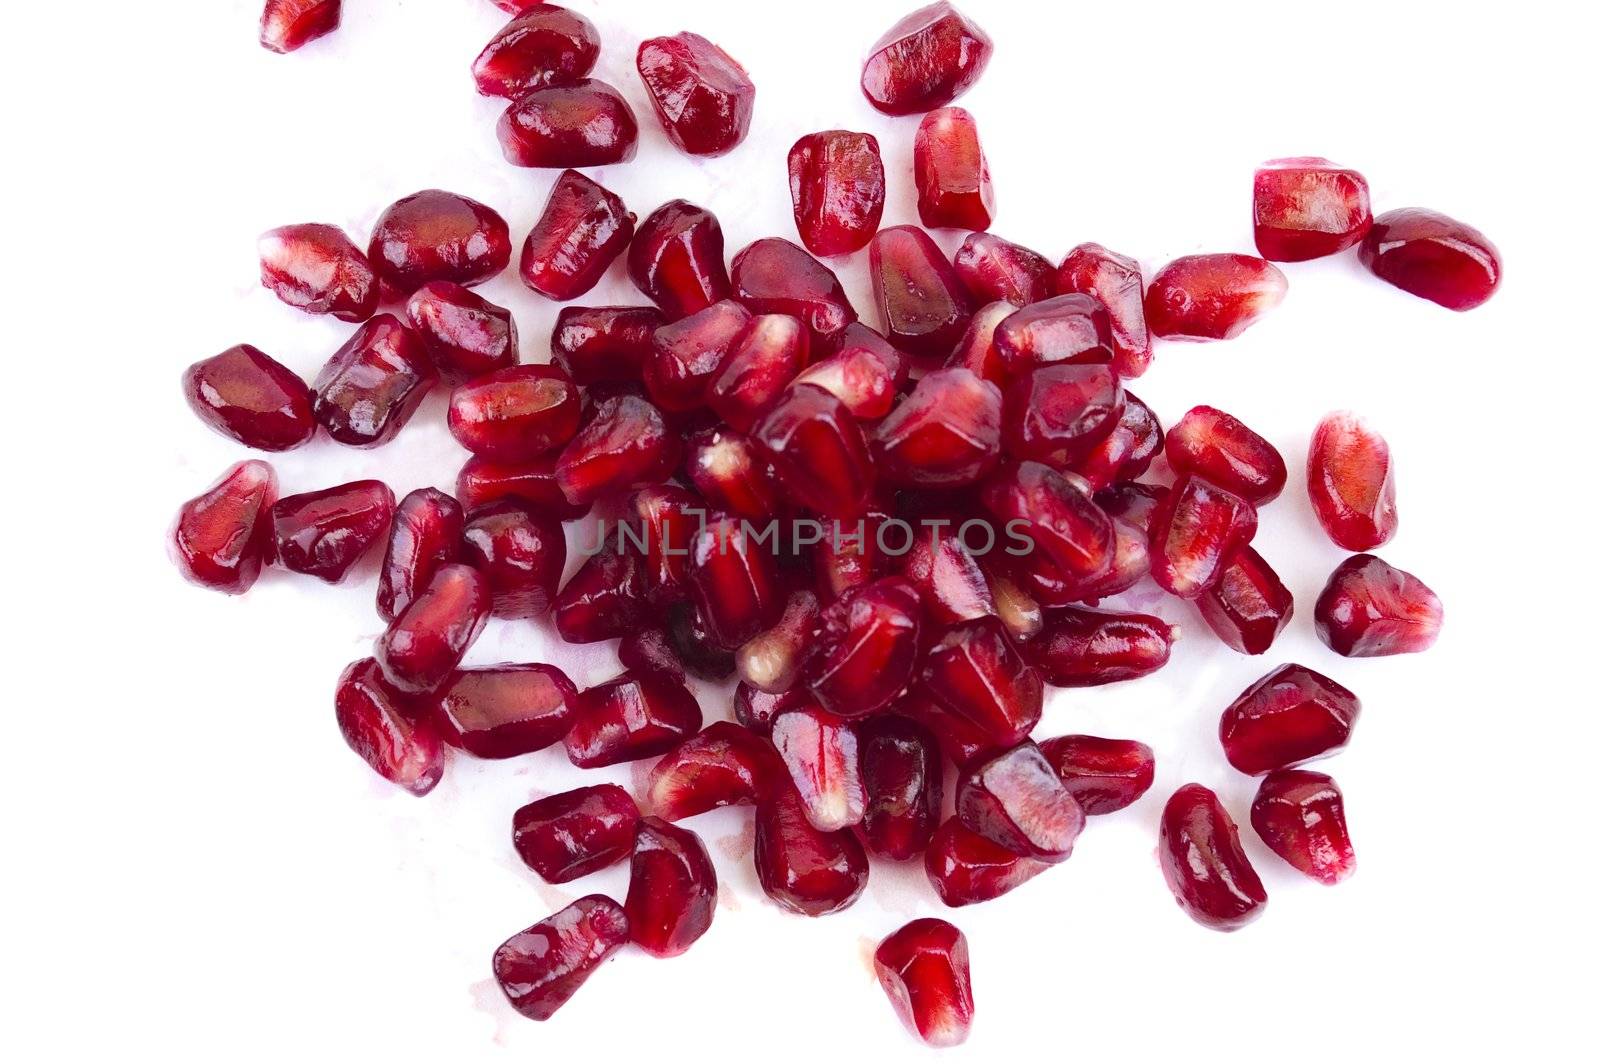 pomegranate seeds by Triphka